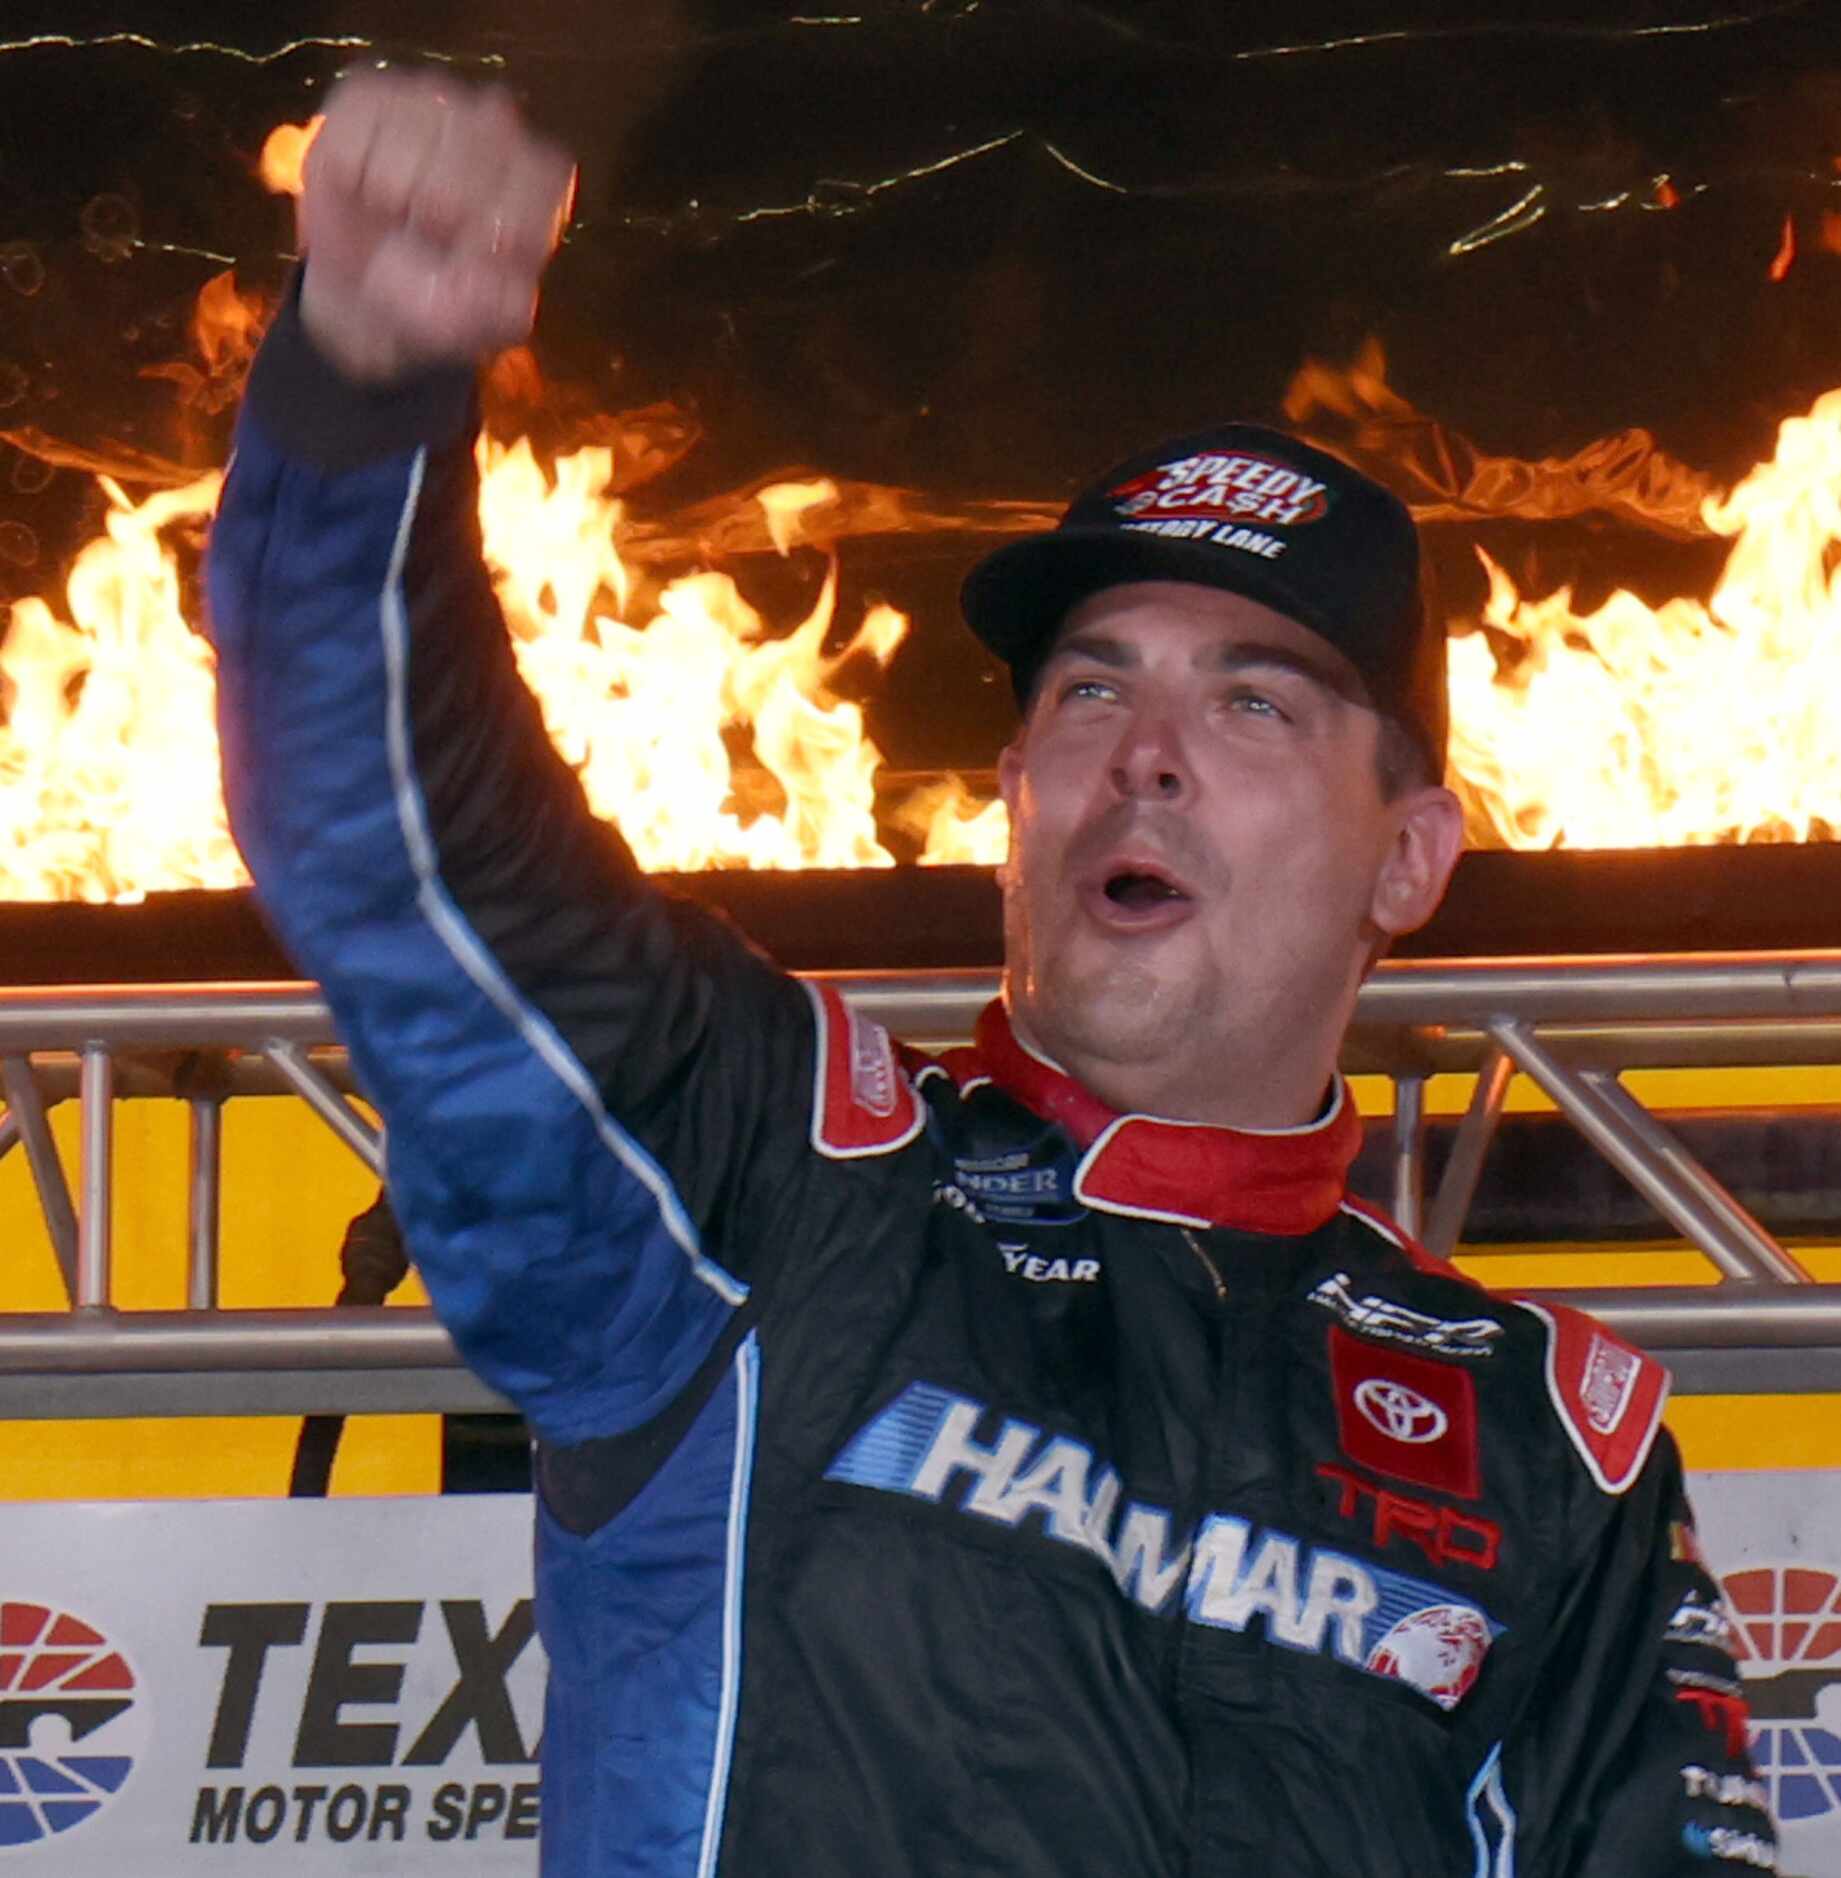 Driver Stewart Friesen pumps his first in the air after retaking the lead in the final laps...